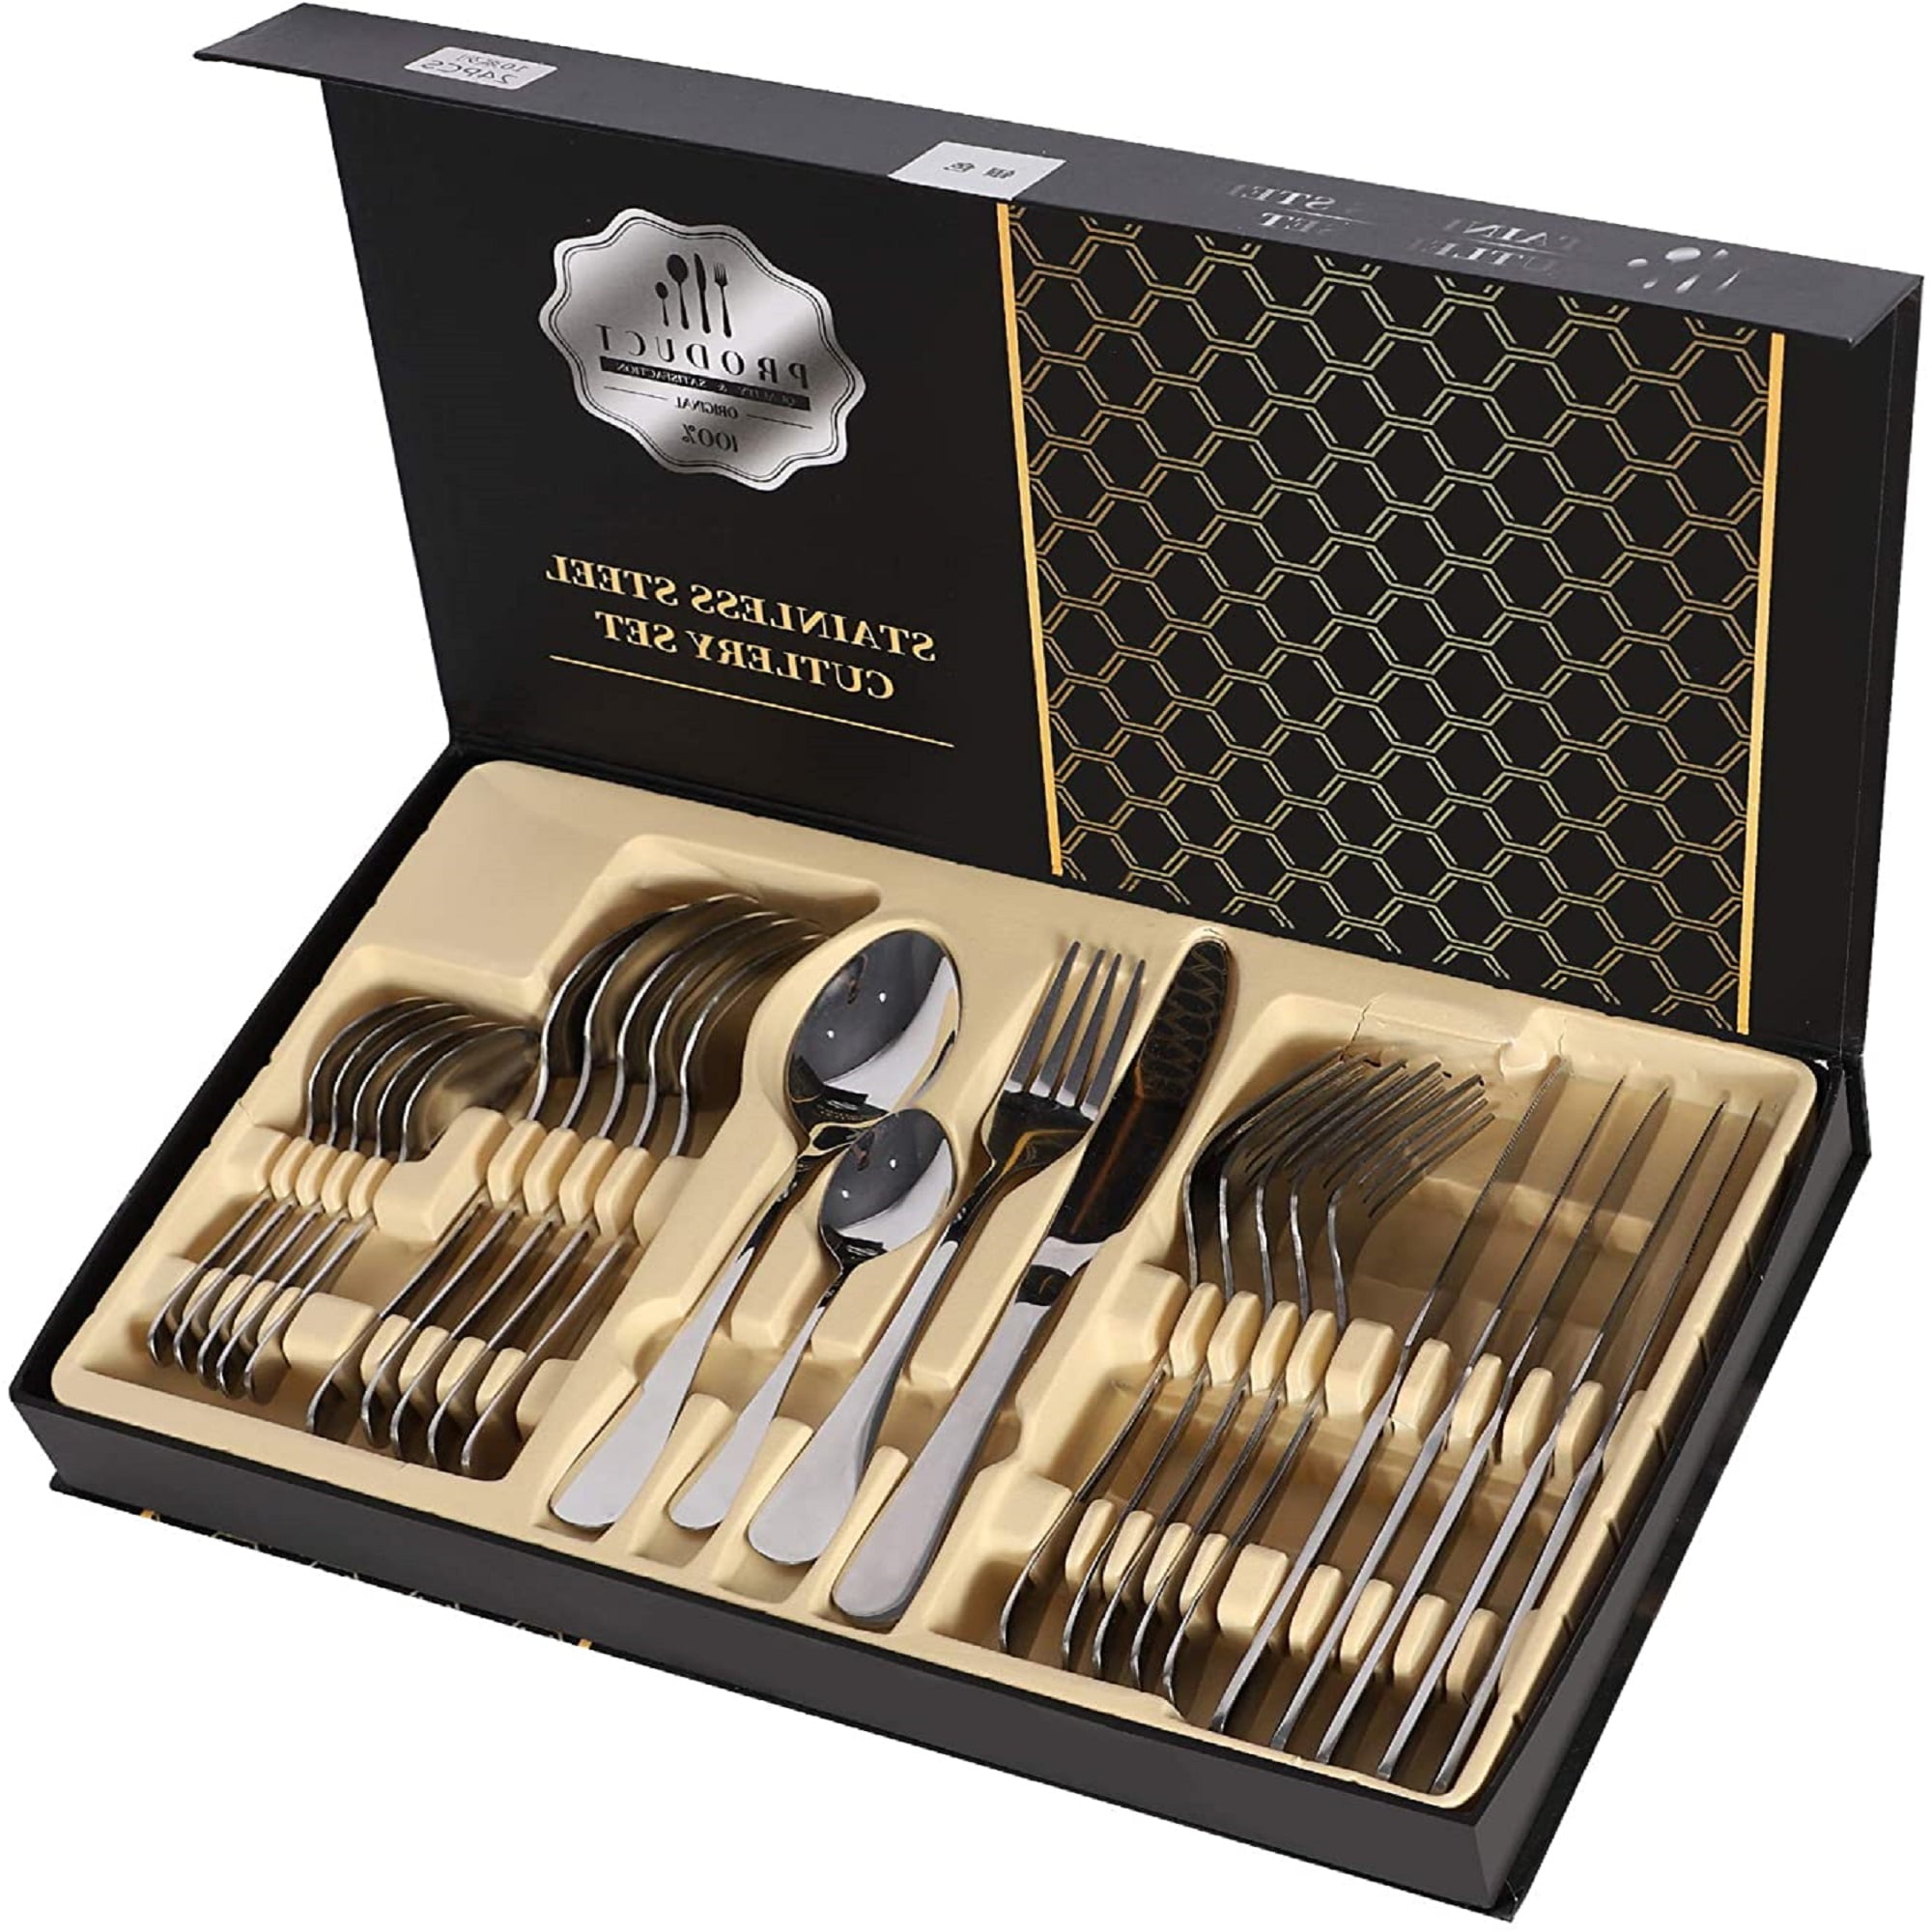 dishwasher safe 10698 Stainless Steel Cutlery Set 24 pieces Stainless